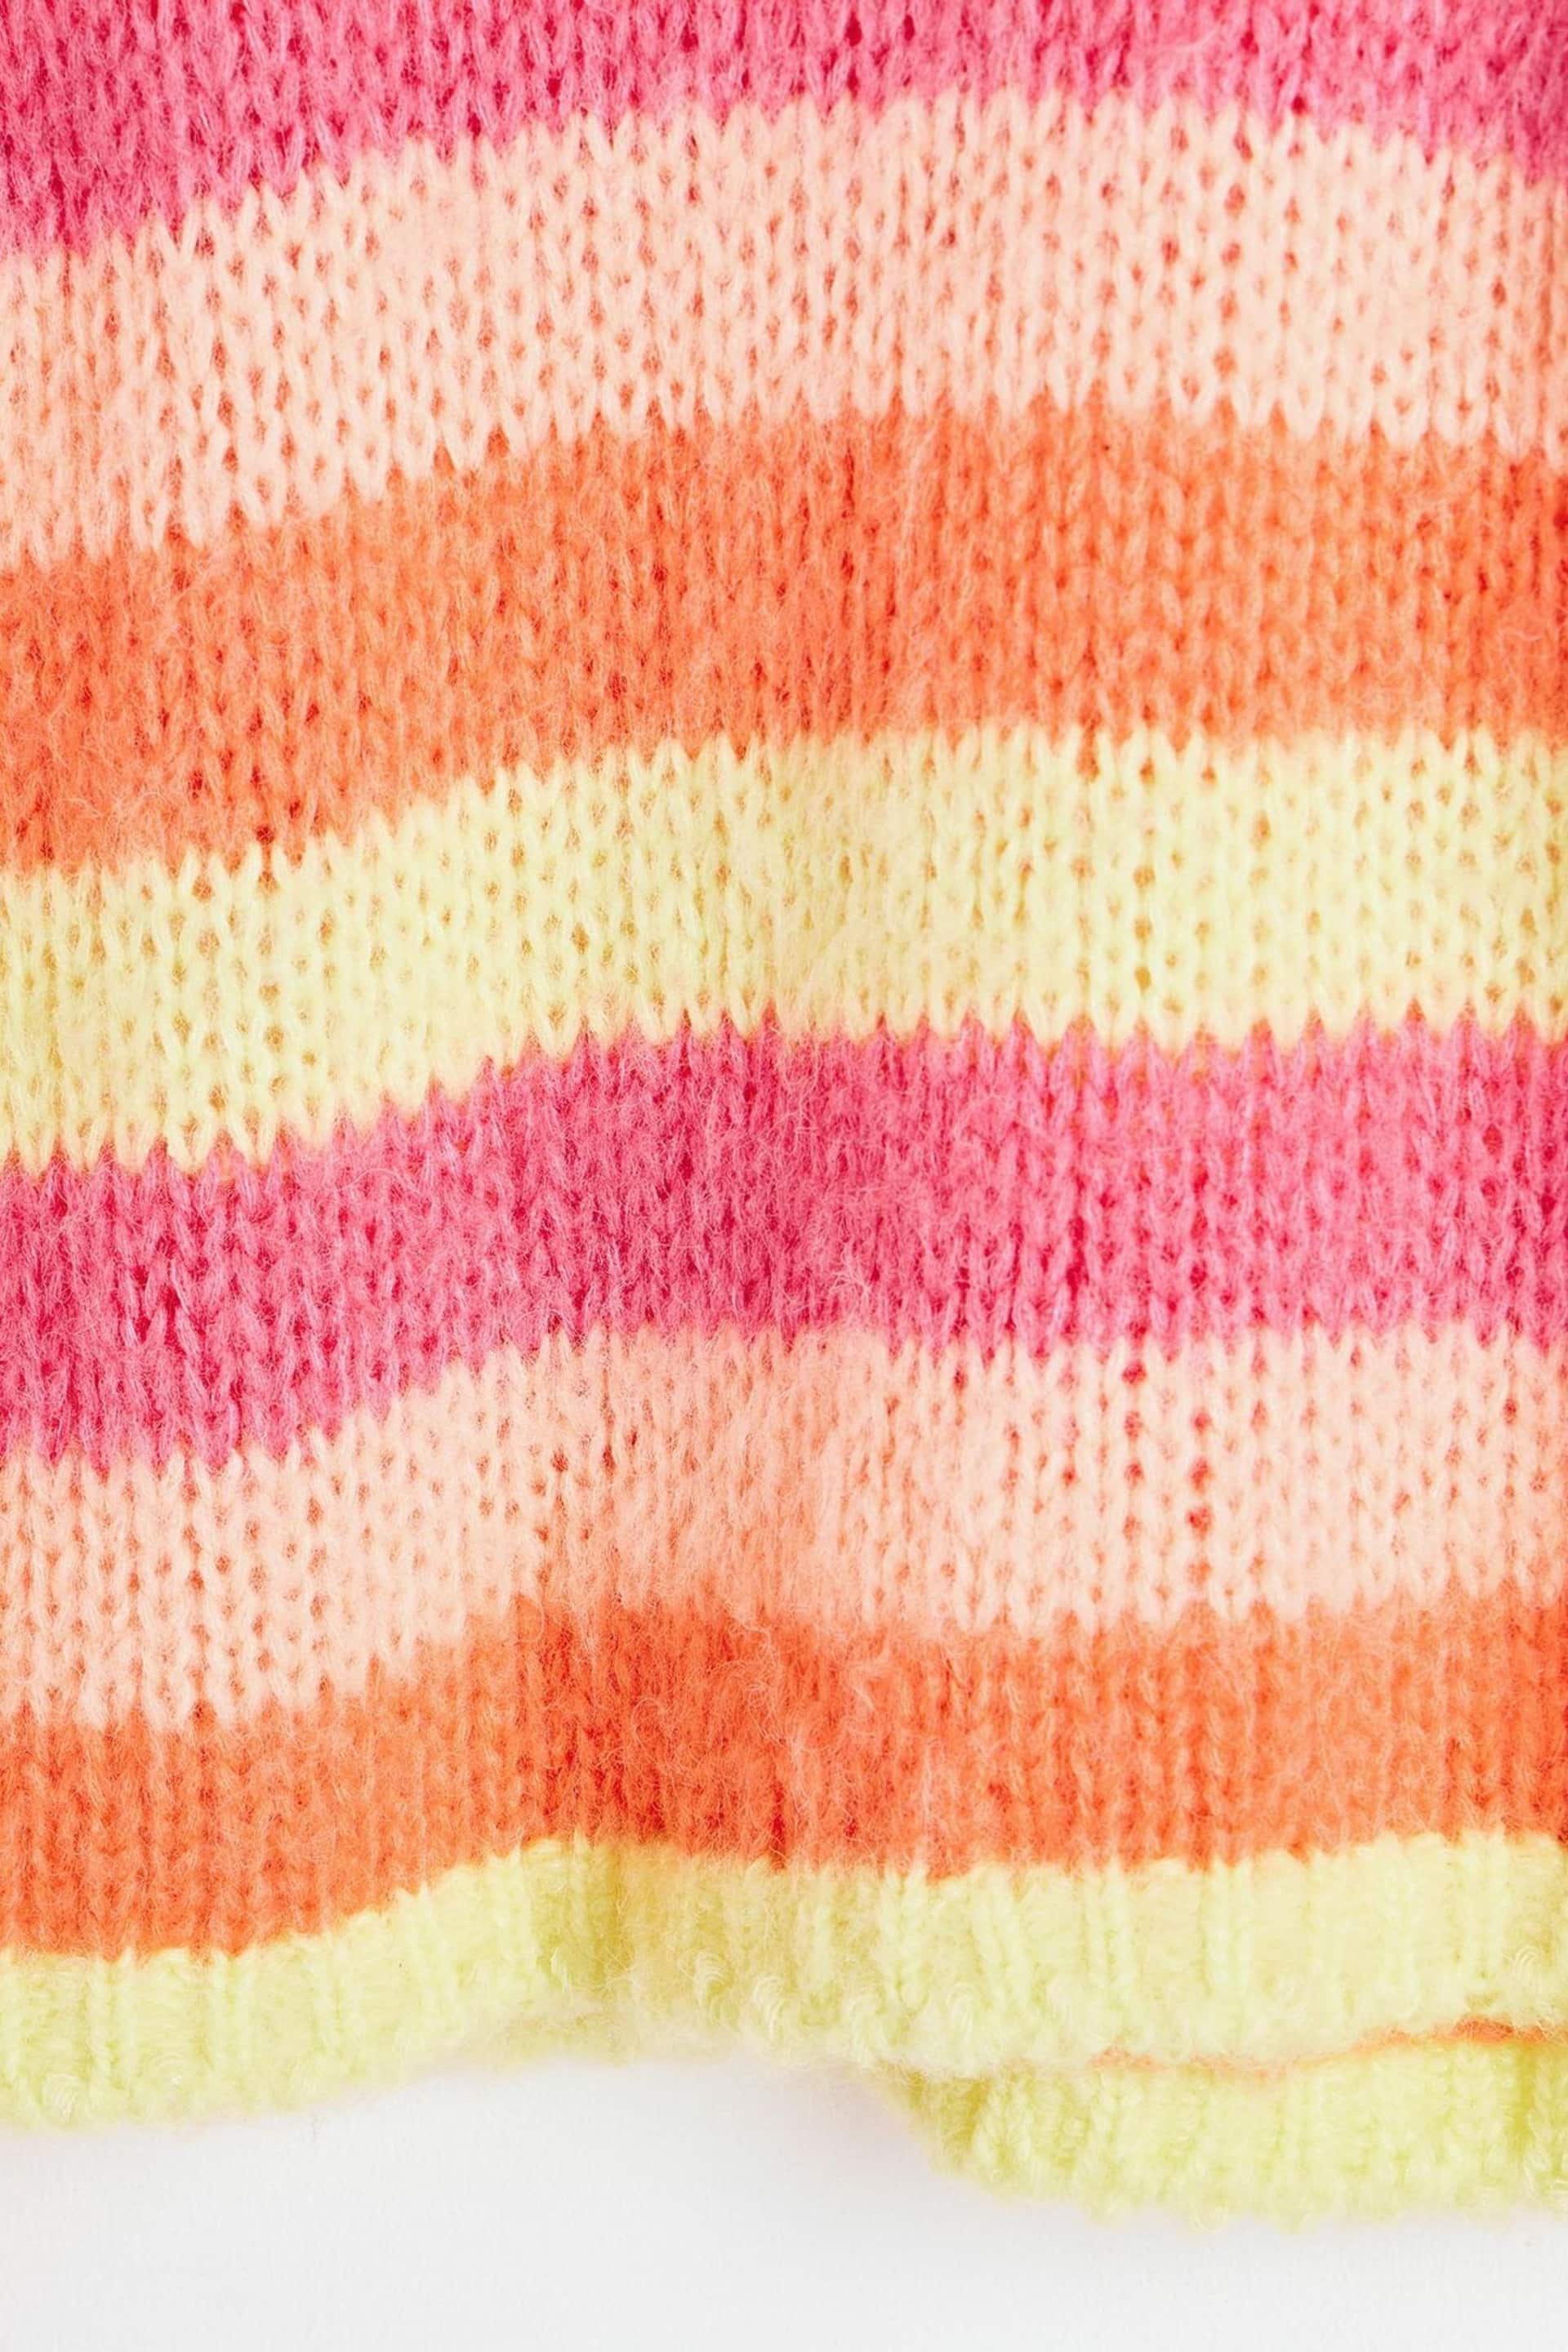 Oliver Bonas Multi Striped Lofty Knitted Jumper - Image 8 of 8